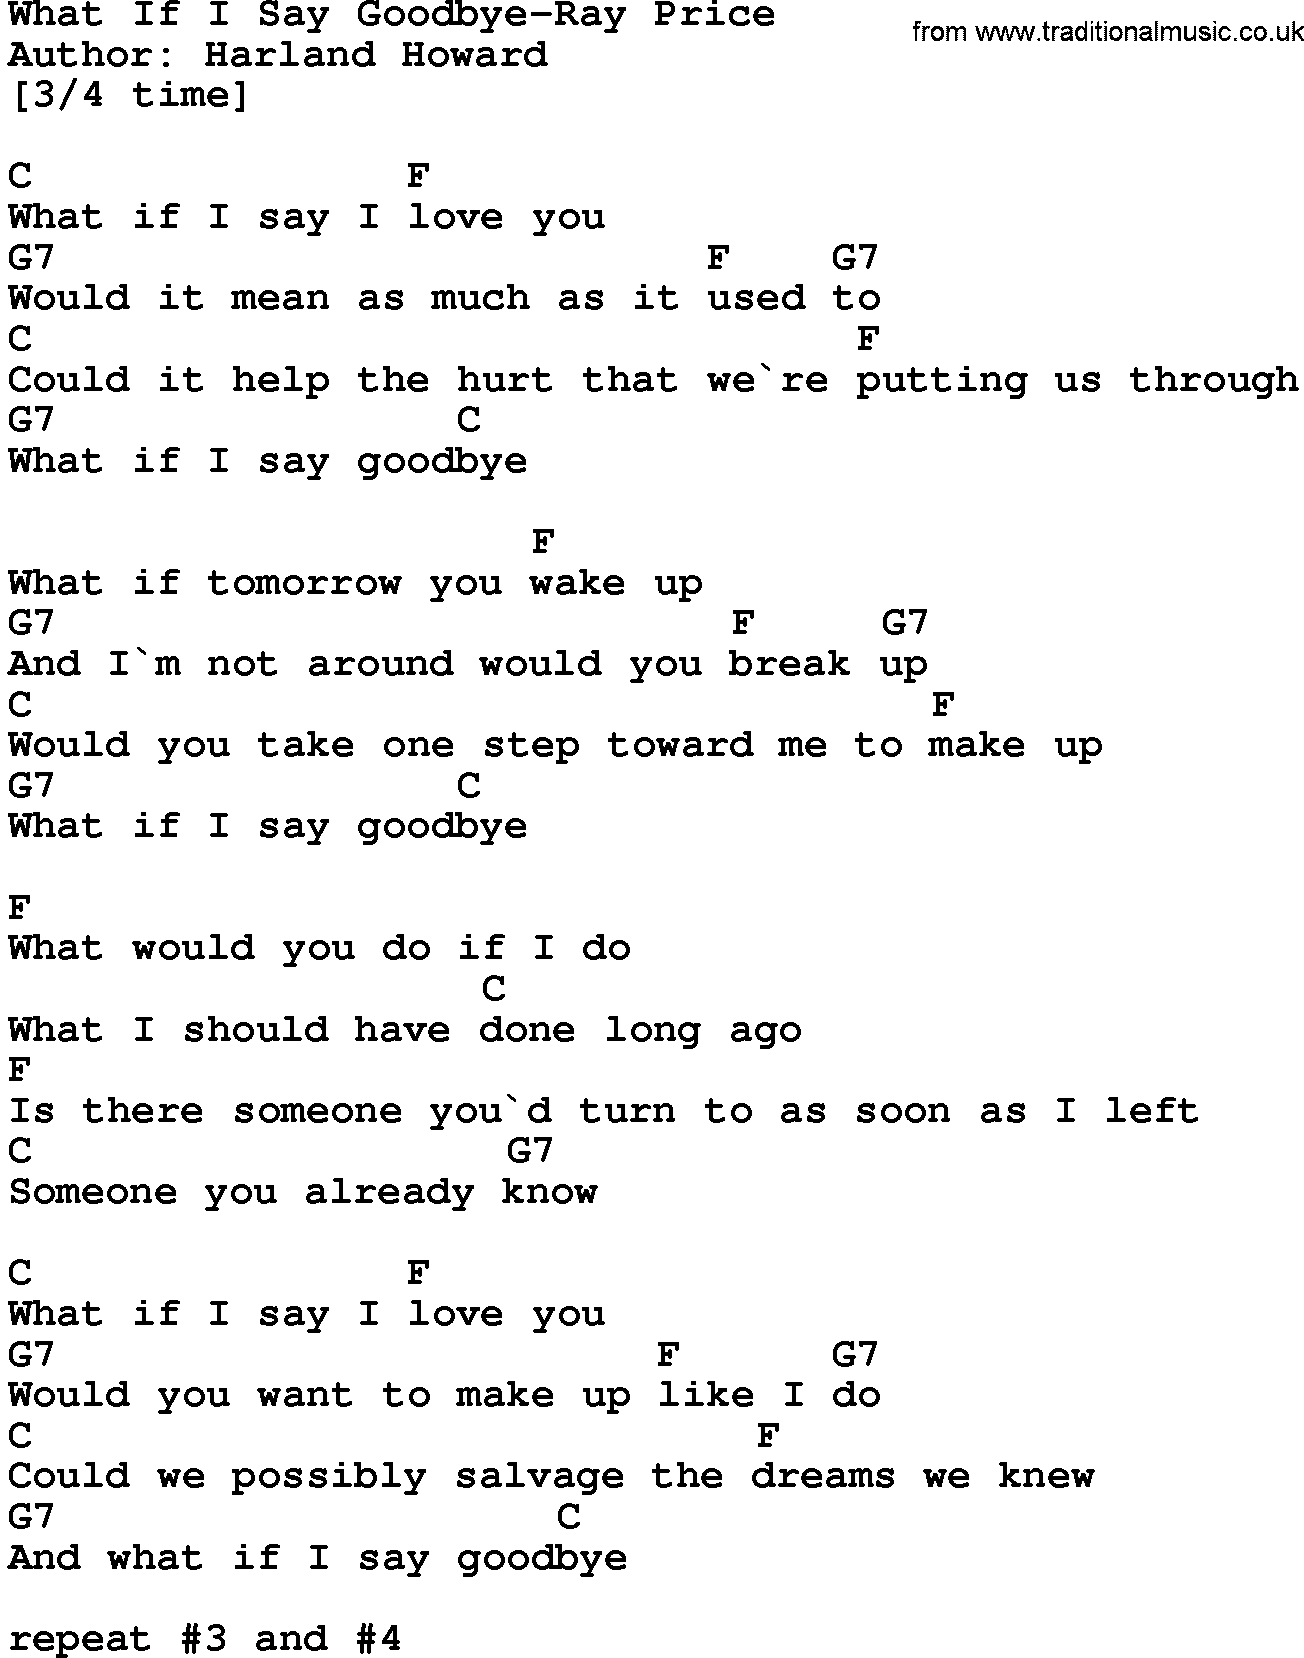 Country music song: What If I Say Goodbye-Ray Price lyrics and chords